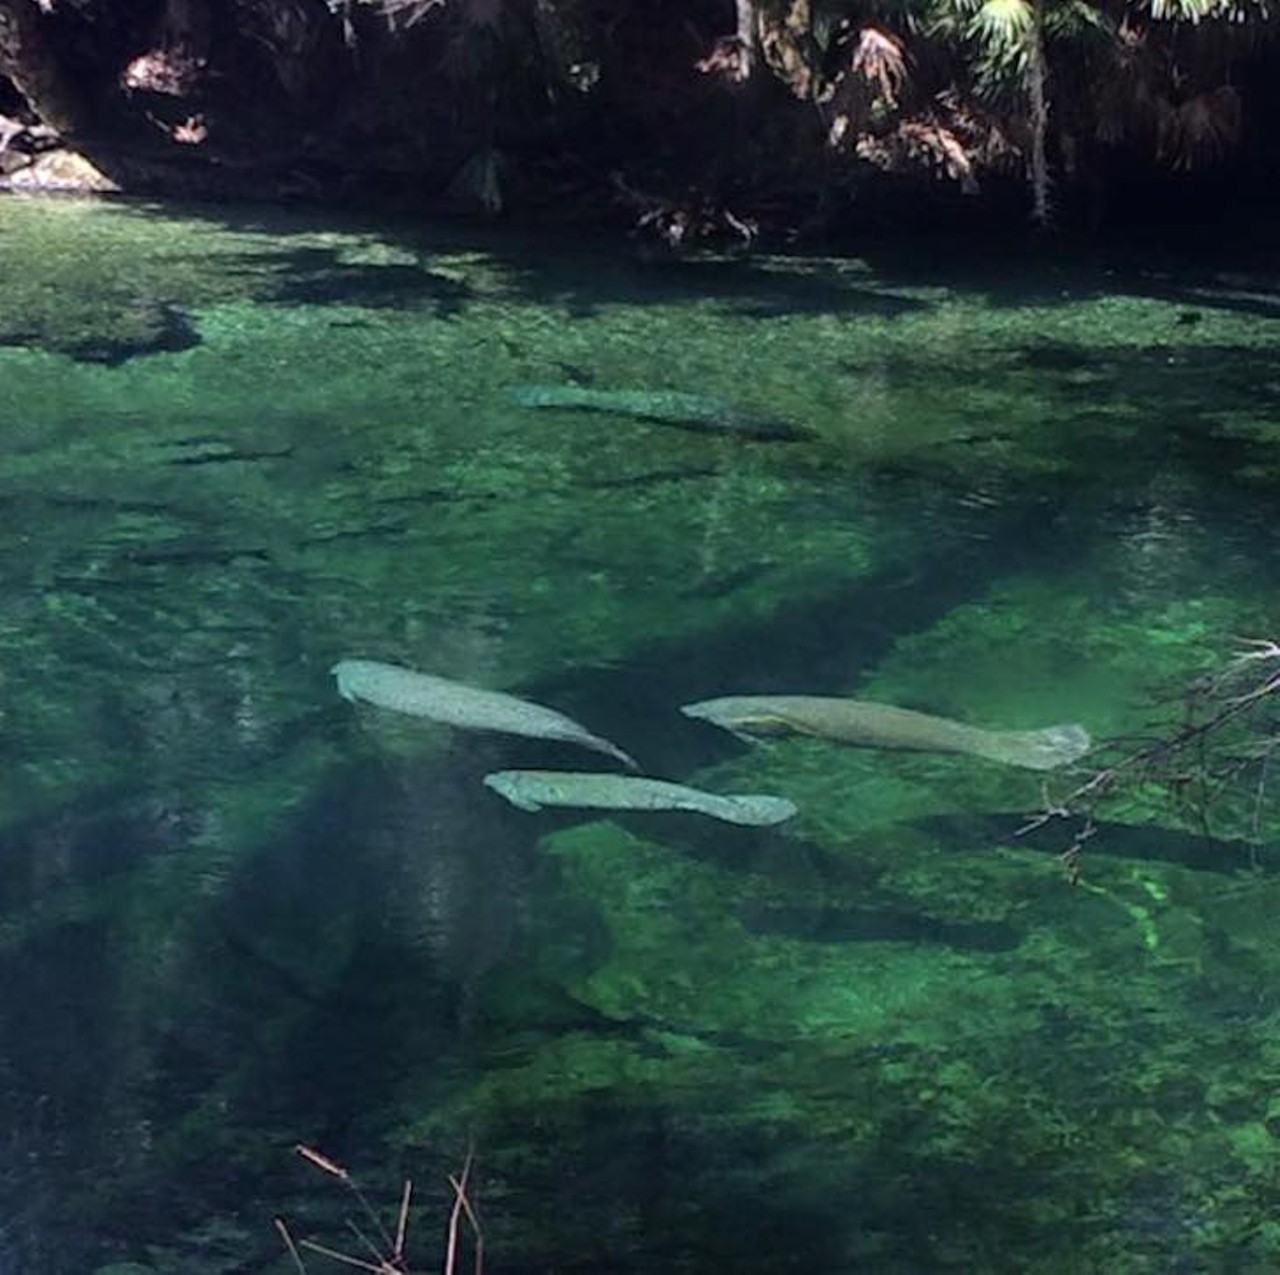 Check out manatees at Blue Springs
2100 W. French Ave., Orange City, 386-775-3663 
Blue Springs gets its name from the signature rich cerulean tint to the water. We hear you can even call in ahead and ask how many manatees are at the spring on any given day. 
Photo via Nic Peterson/Facebook